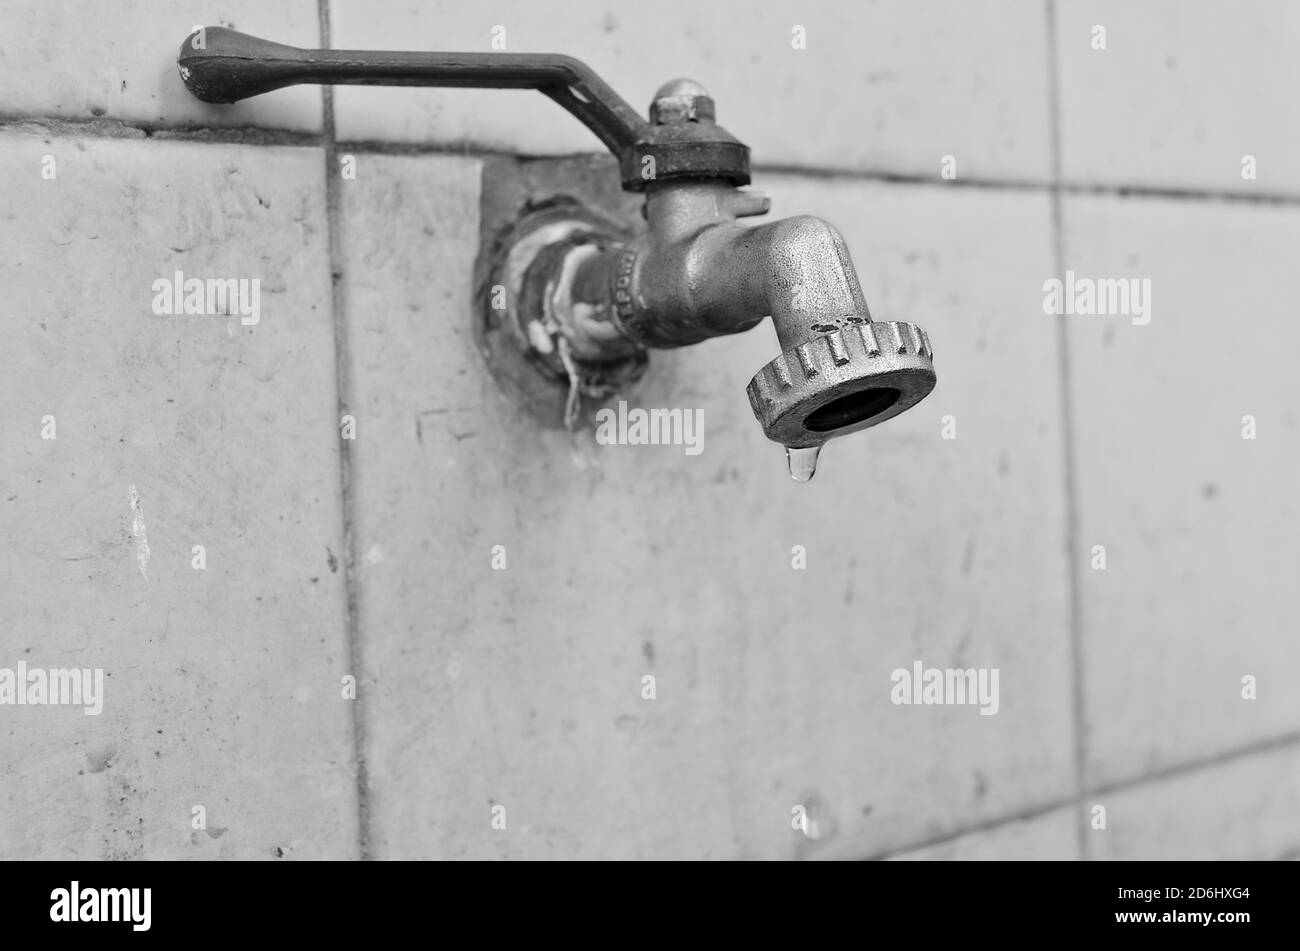 Closeup of waterdrops falling from a grunge faucet placed on white tiles Stock Photo